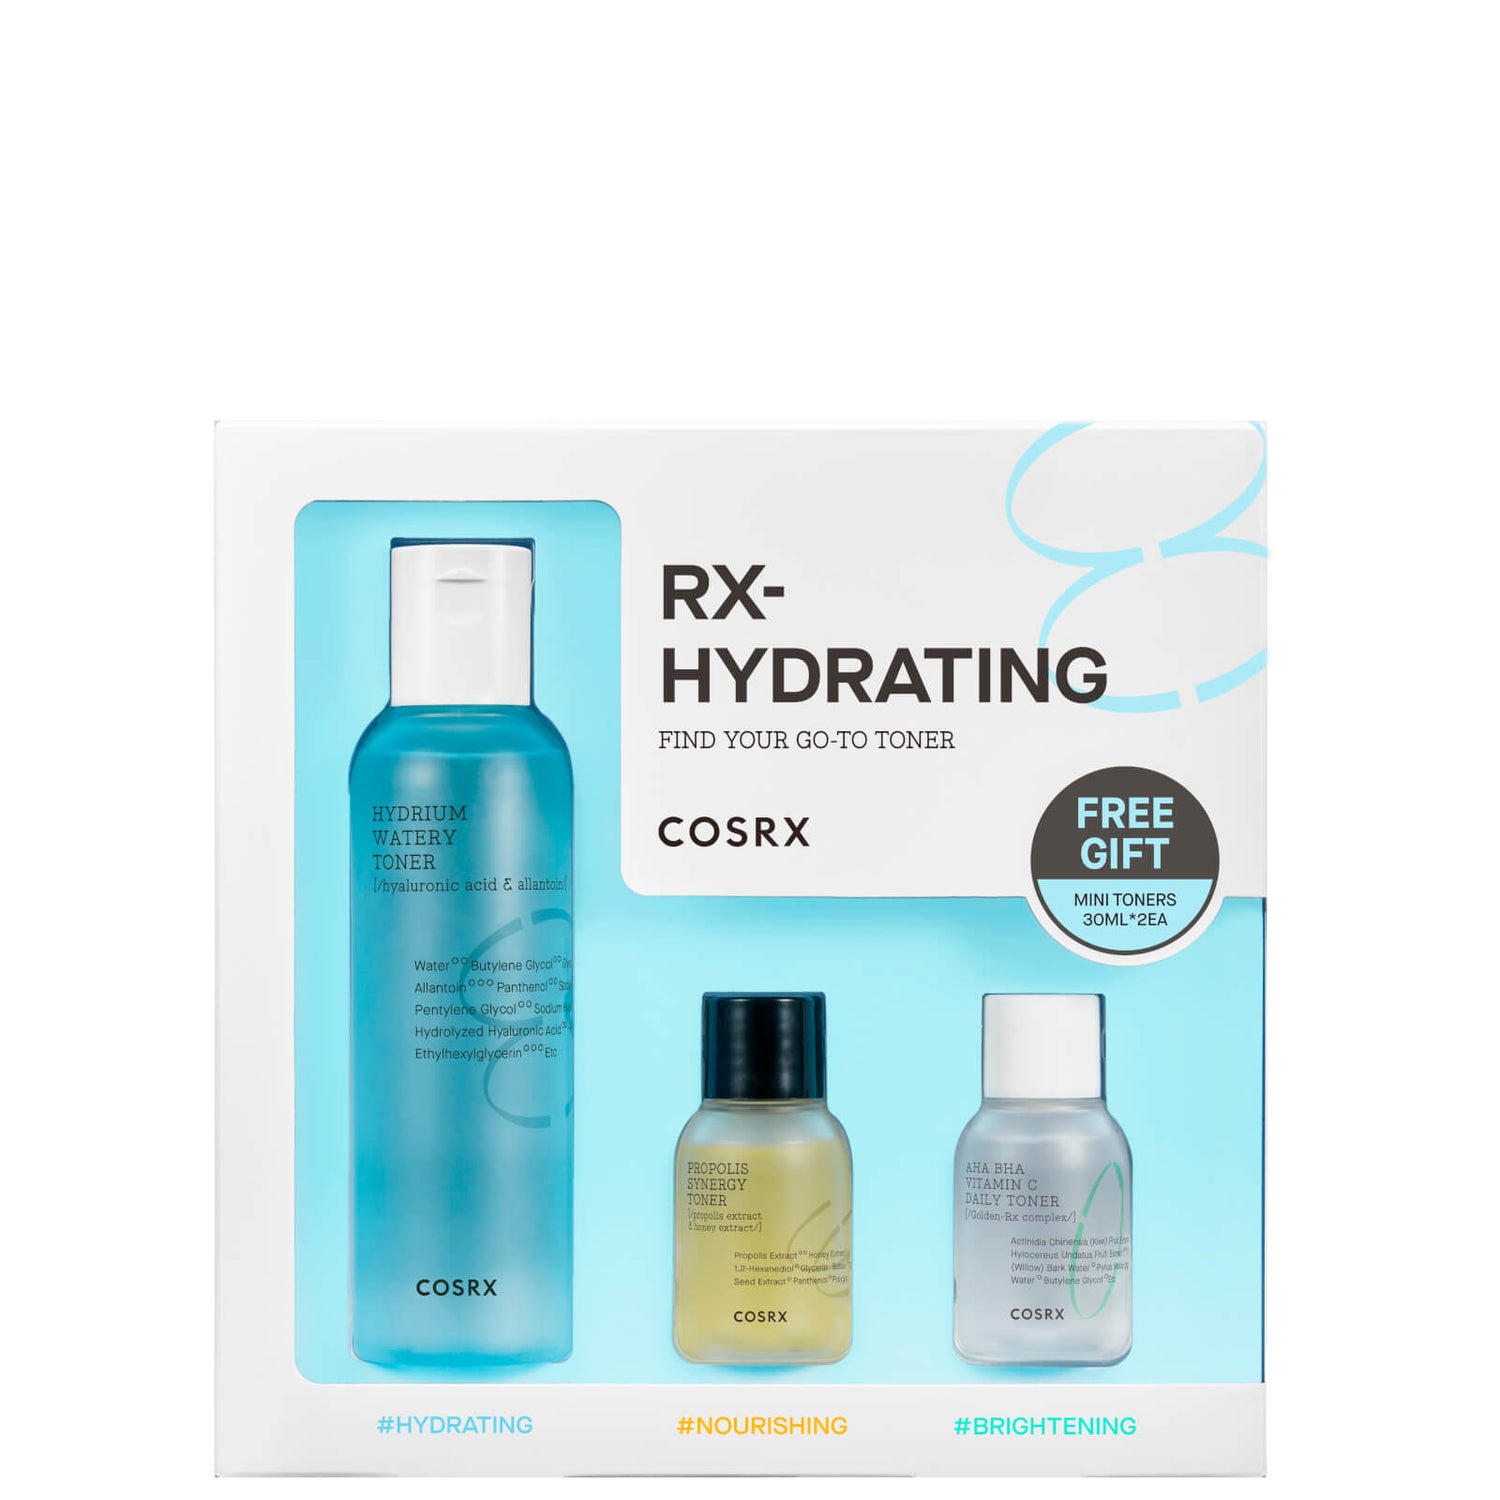 COSRX Find Your Go to Toner - RX Hydrating